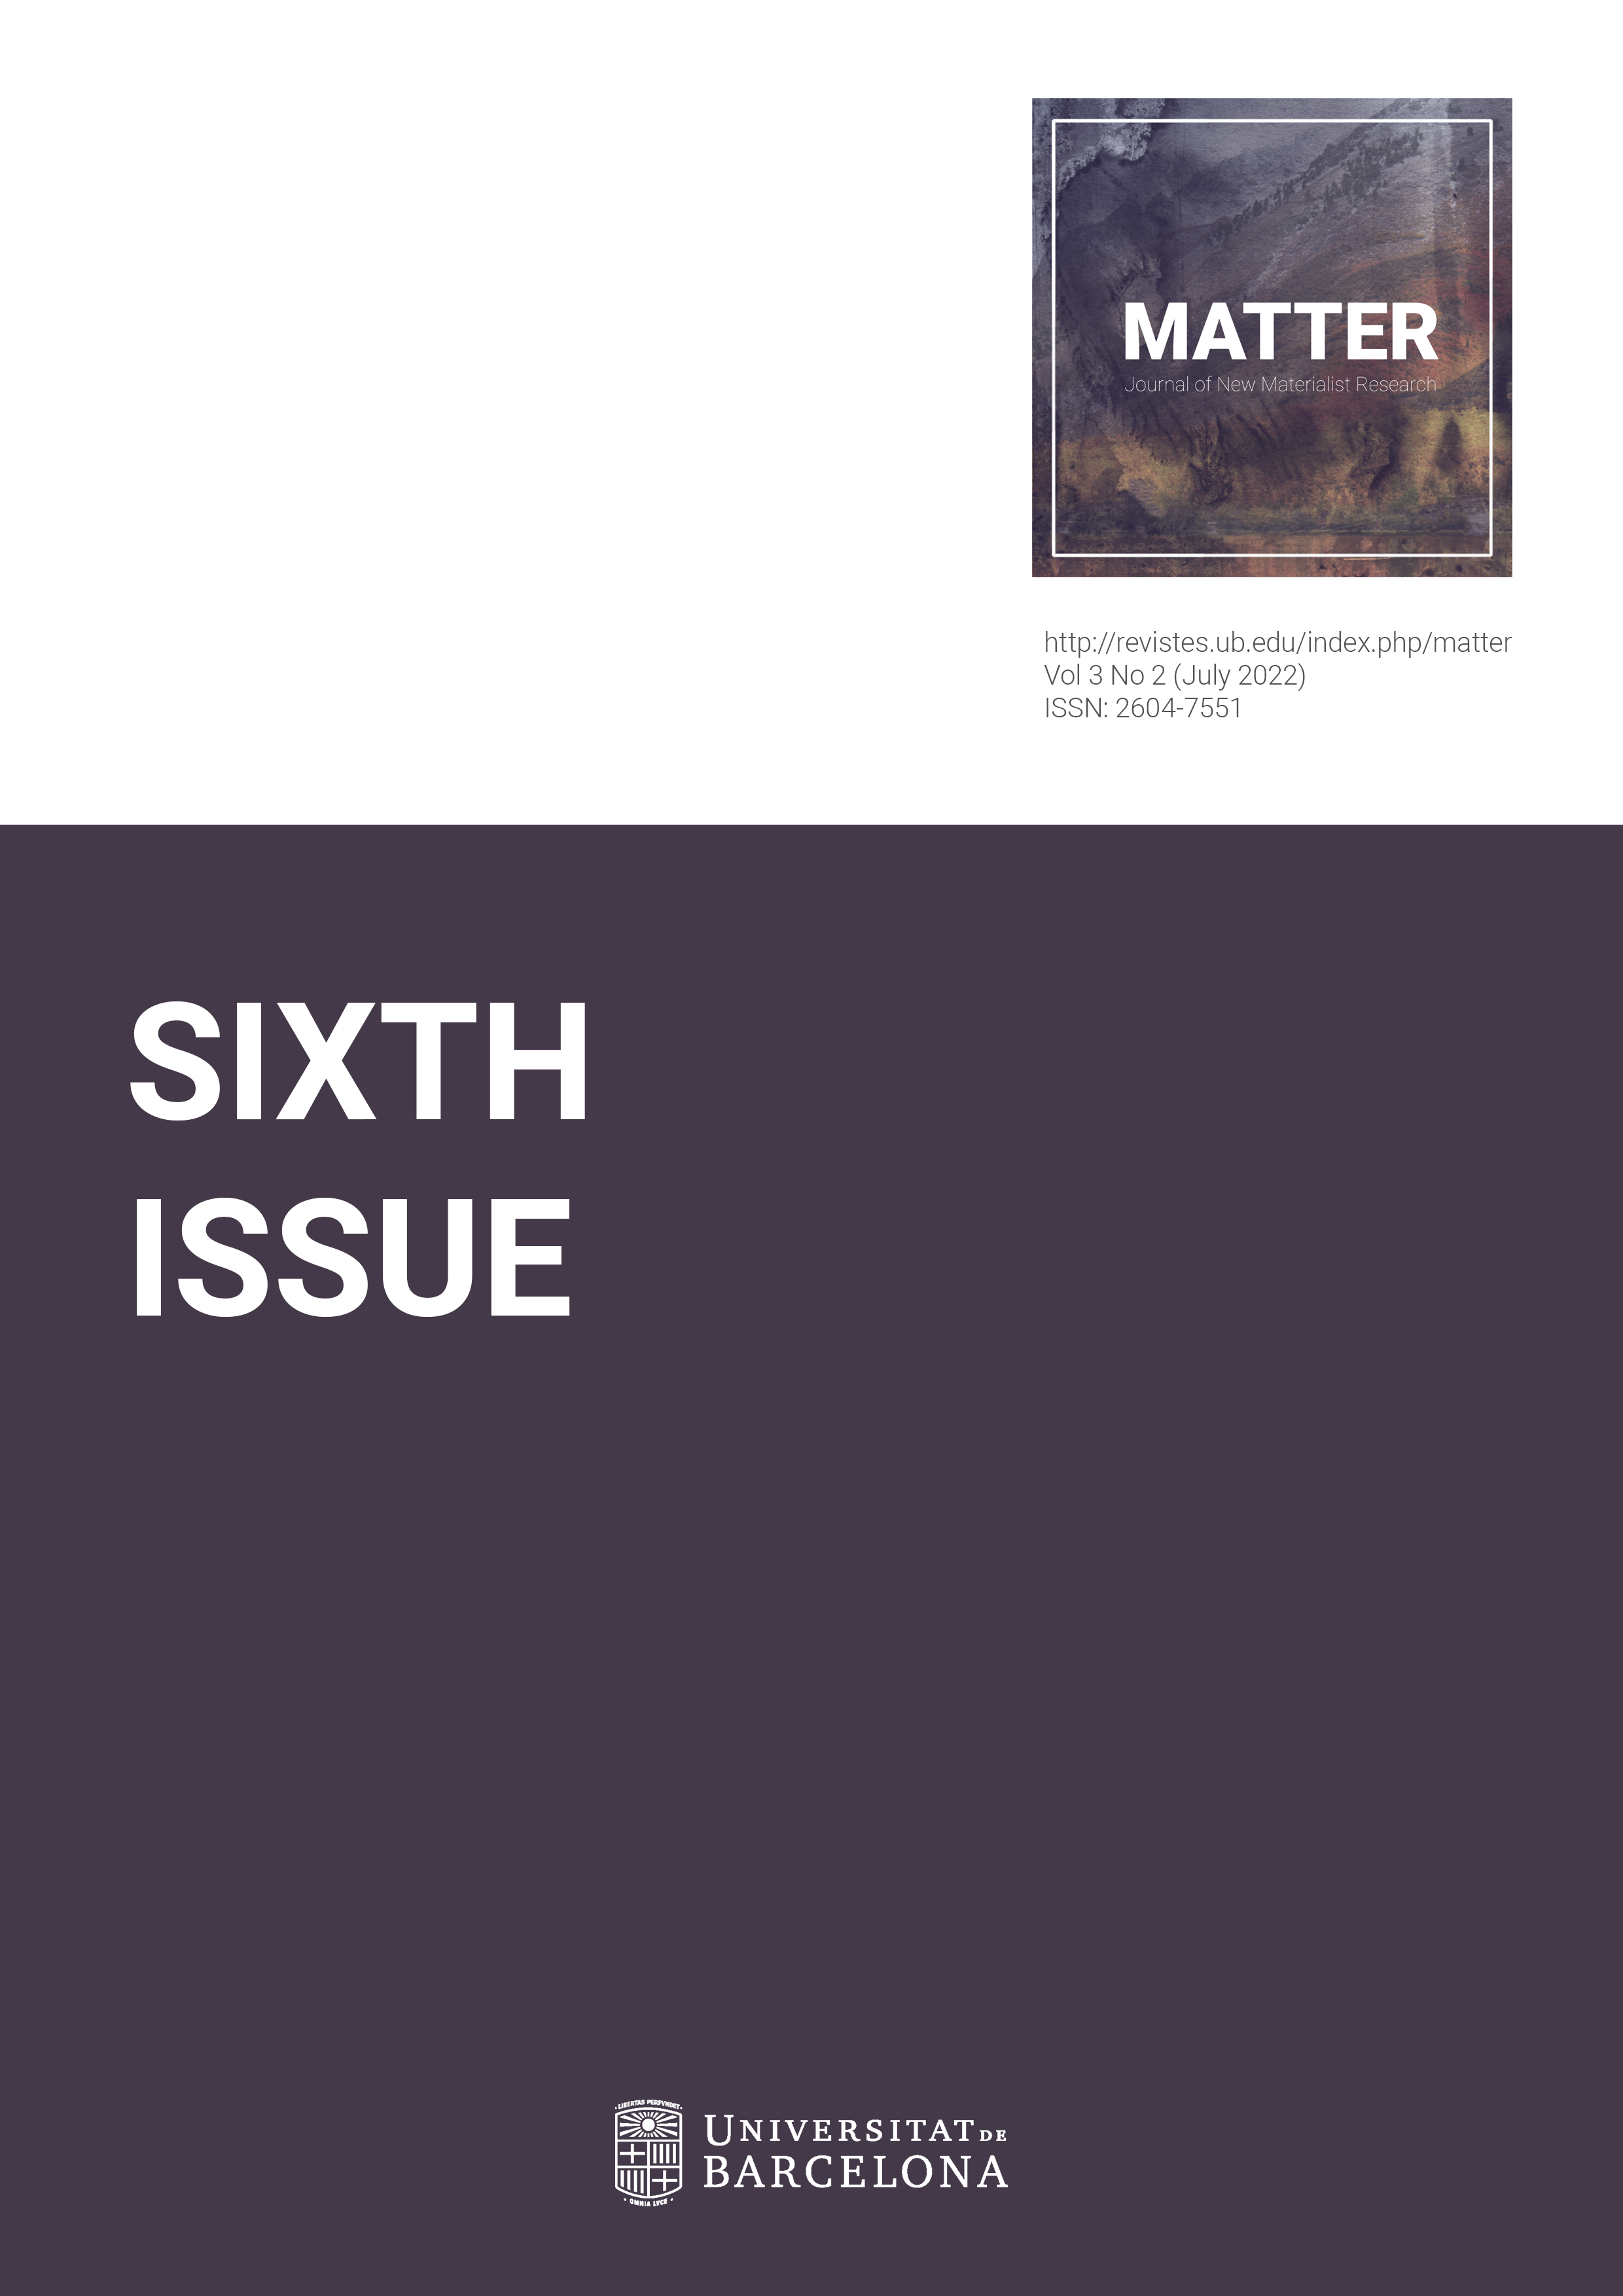 					View Vol. 3 No. 2 (2022): Sixth Issue
				